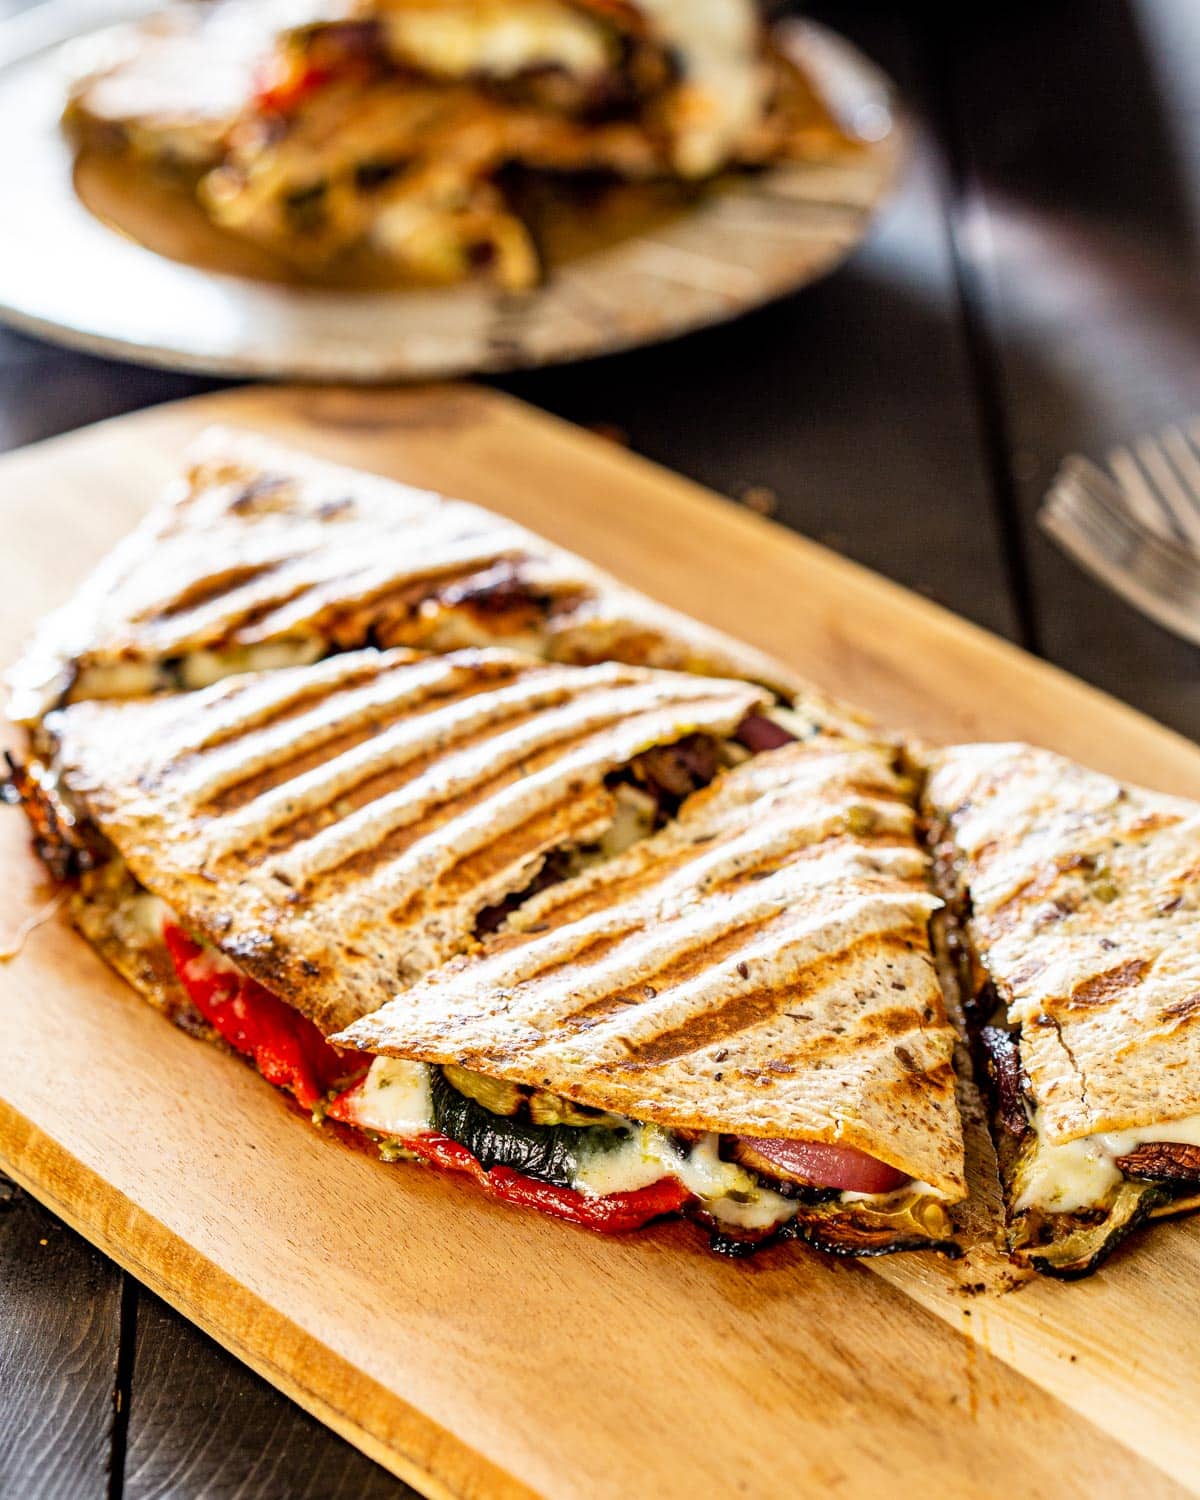 a grilled vegetable quesadillas on a cutting board cut in quarters with a plate in the background